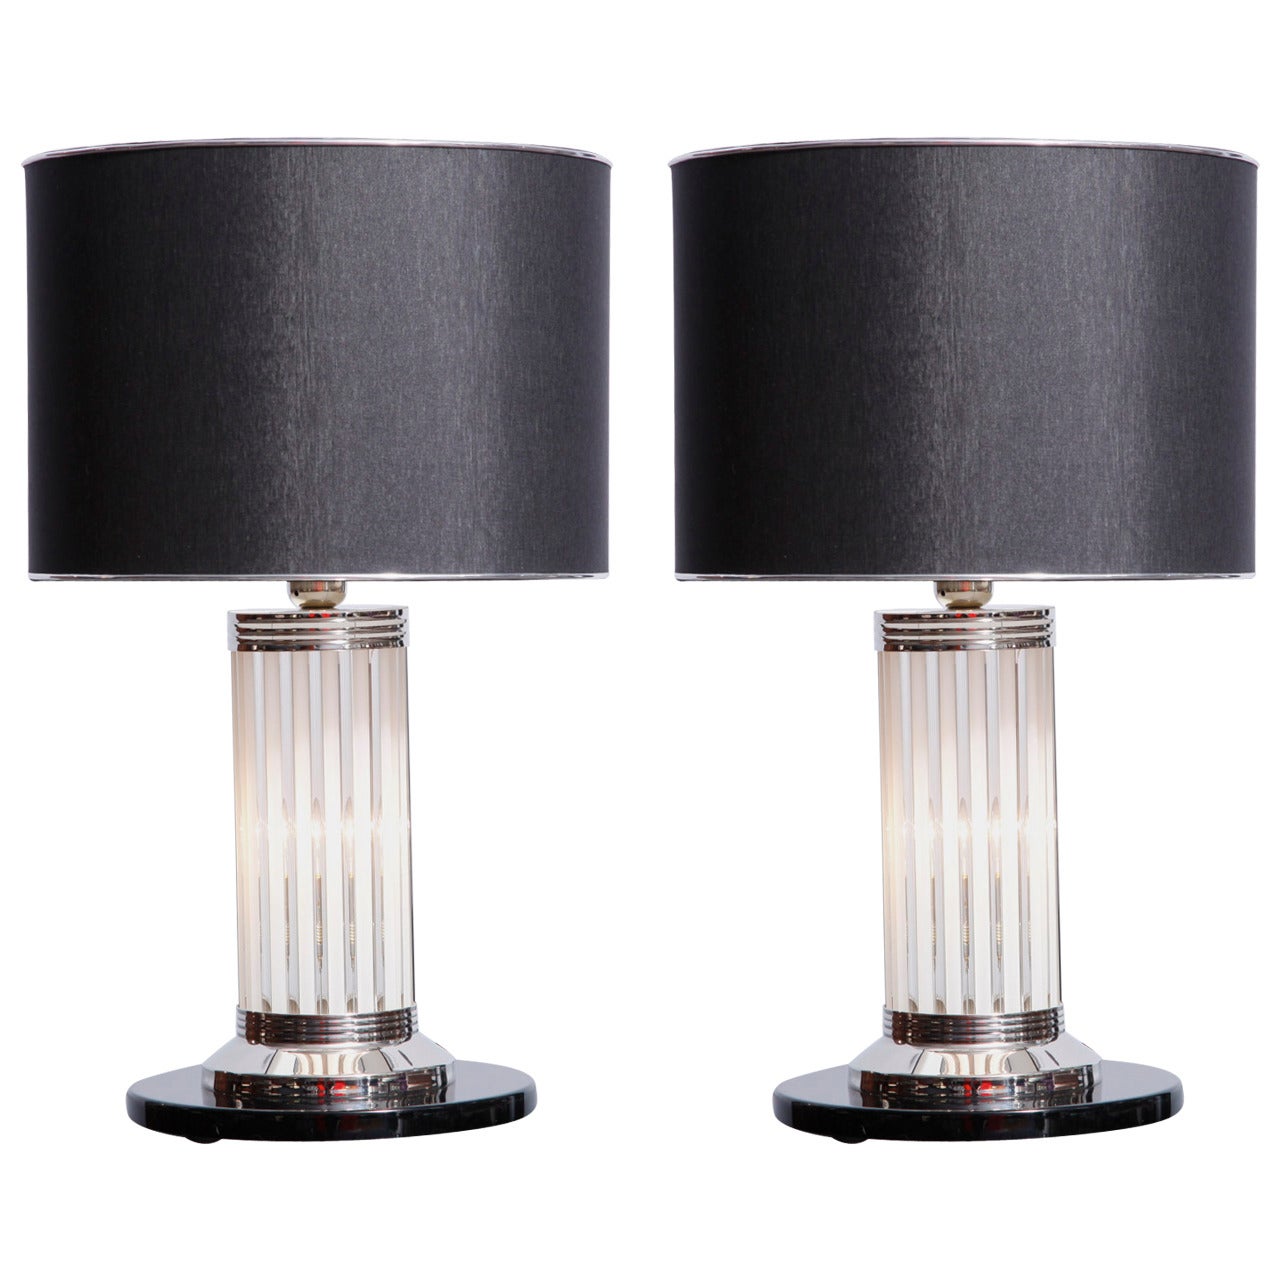 Pair of Art Deco Modernist Lamps by Petitot For Sale